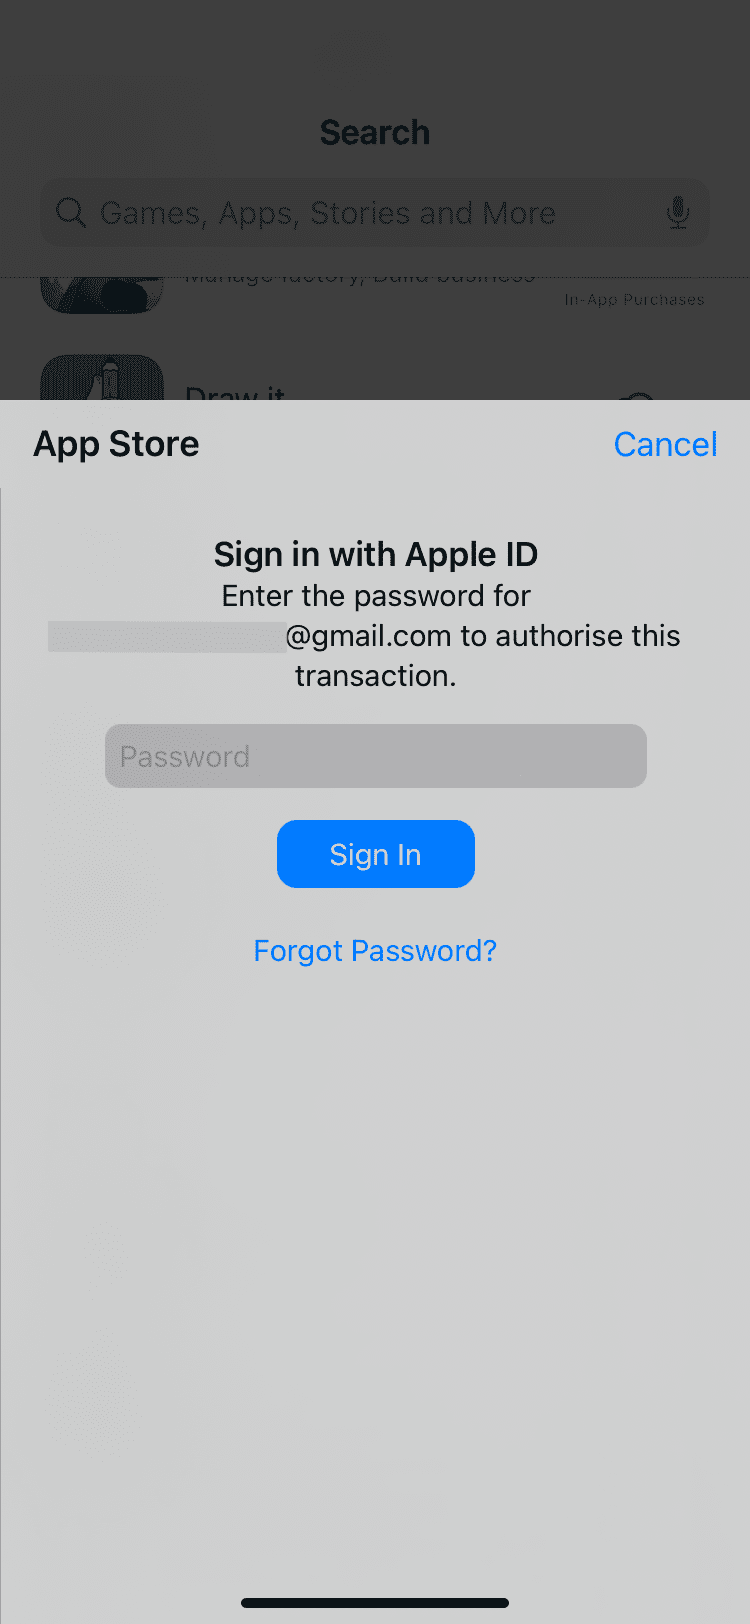 Enter the password for Apple ID to authorise this transaction alert in iPhone App Store